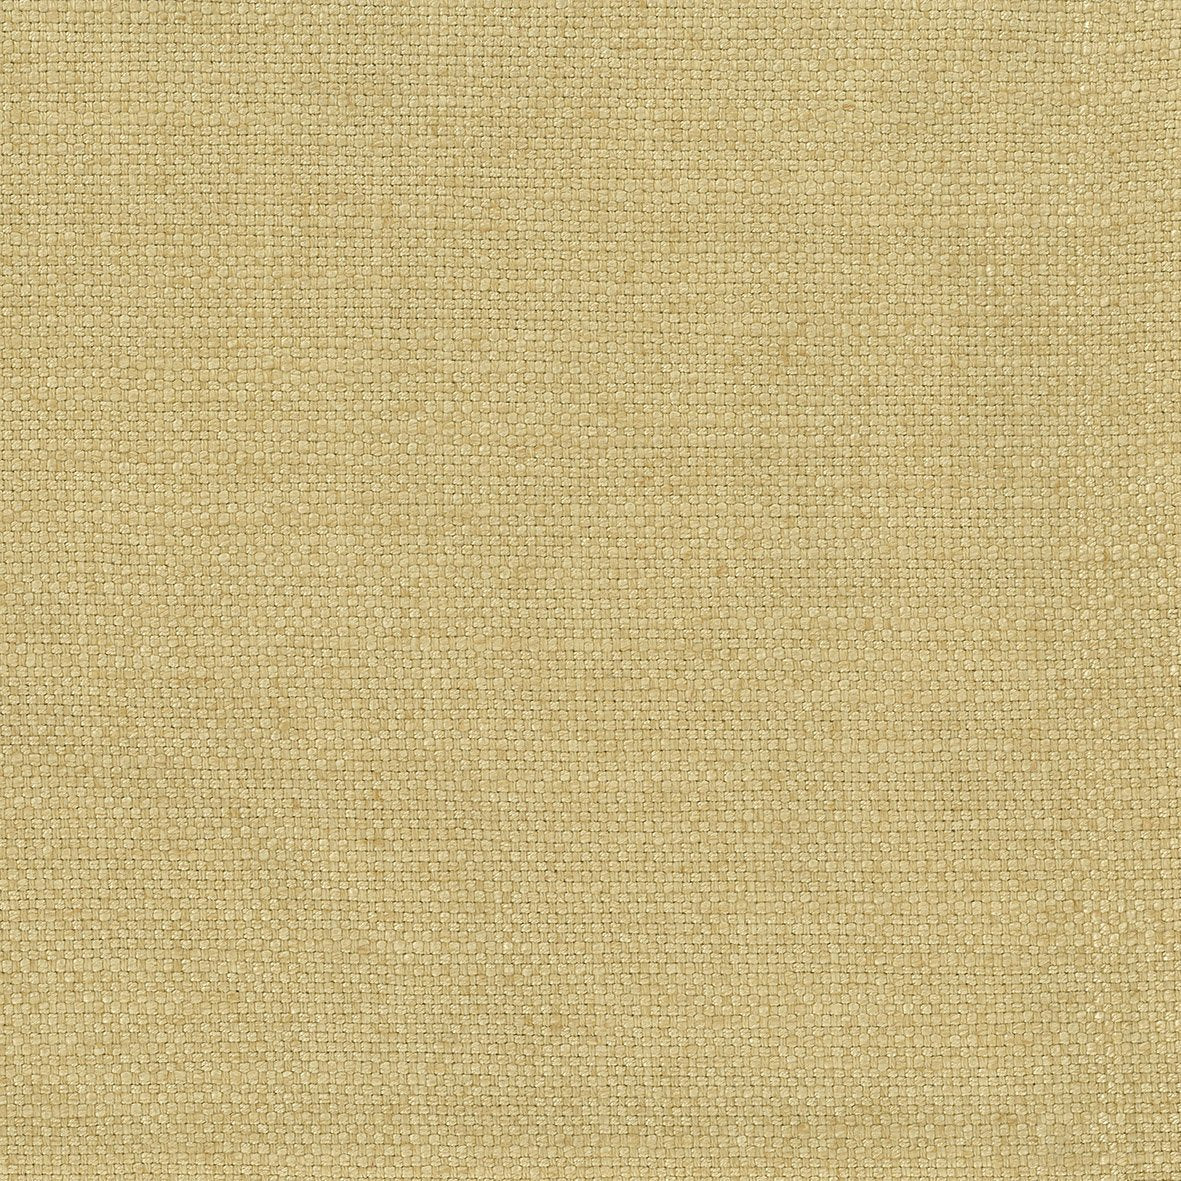 Nina Campbell Fabric - Poquelin Colette Yellow NCF4312-08